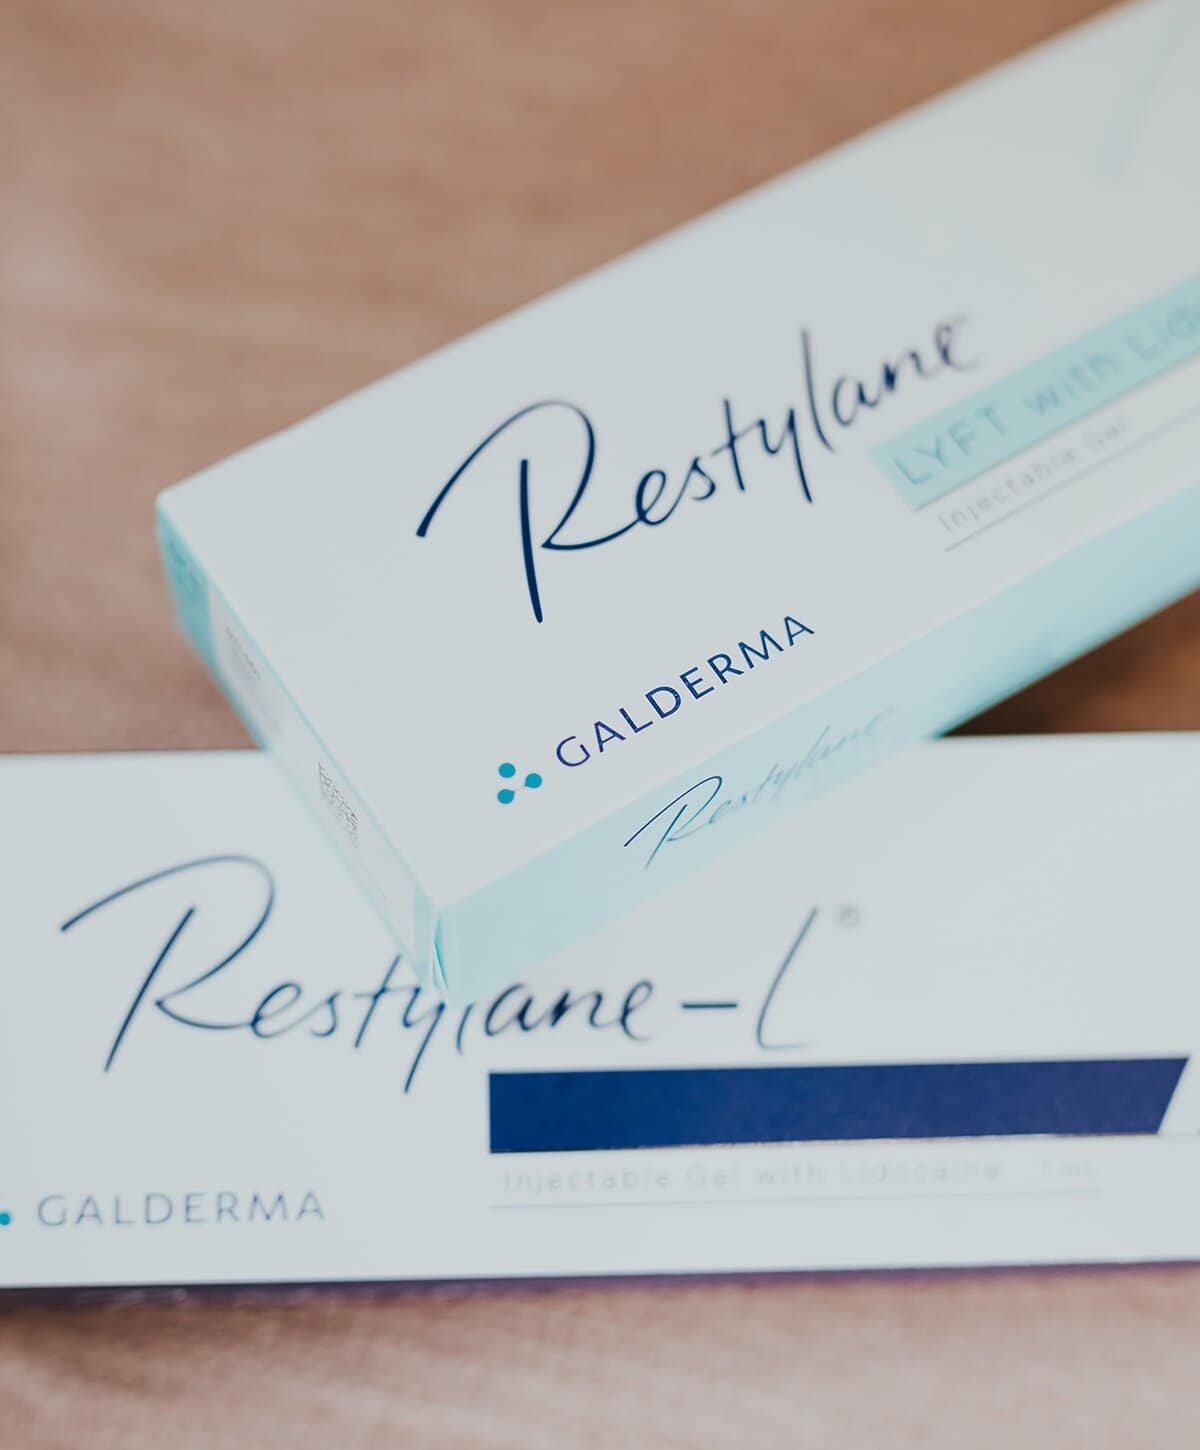 Boxes of Restylane